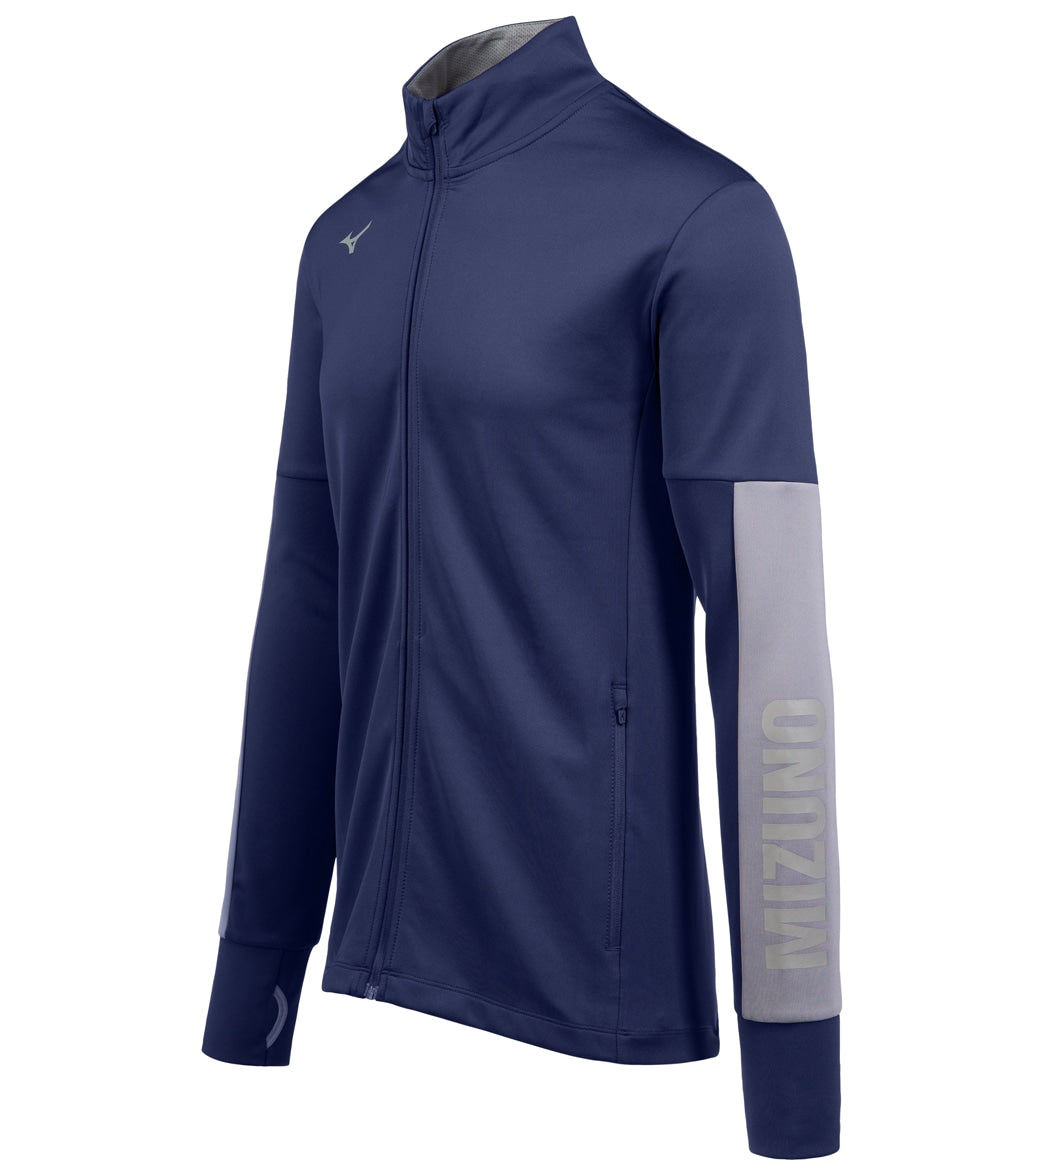 Mizuno Youth Alpha Quest Jacket - Navy/Shade Large - Swimoutlet.com